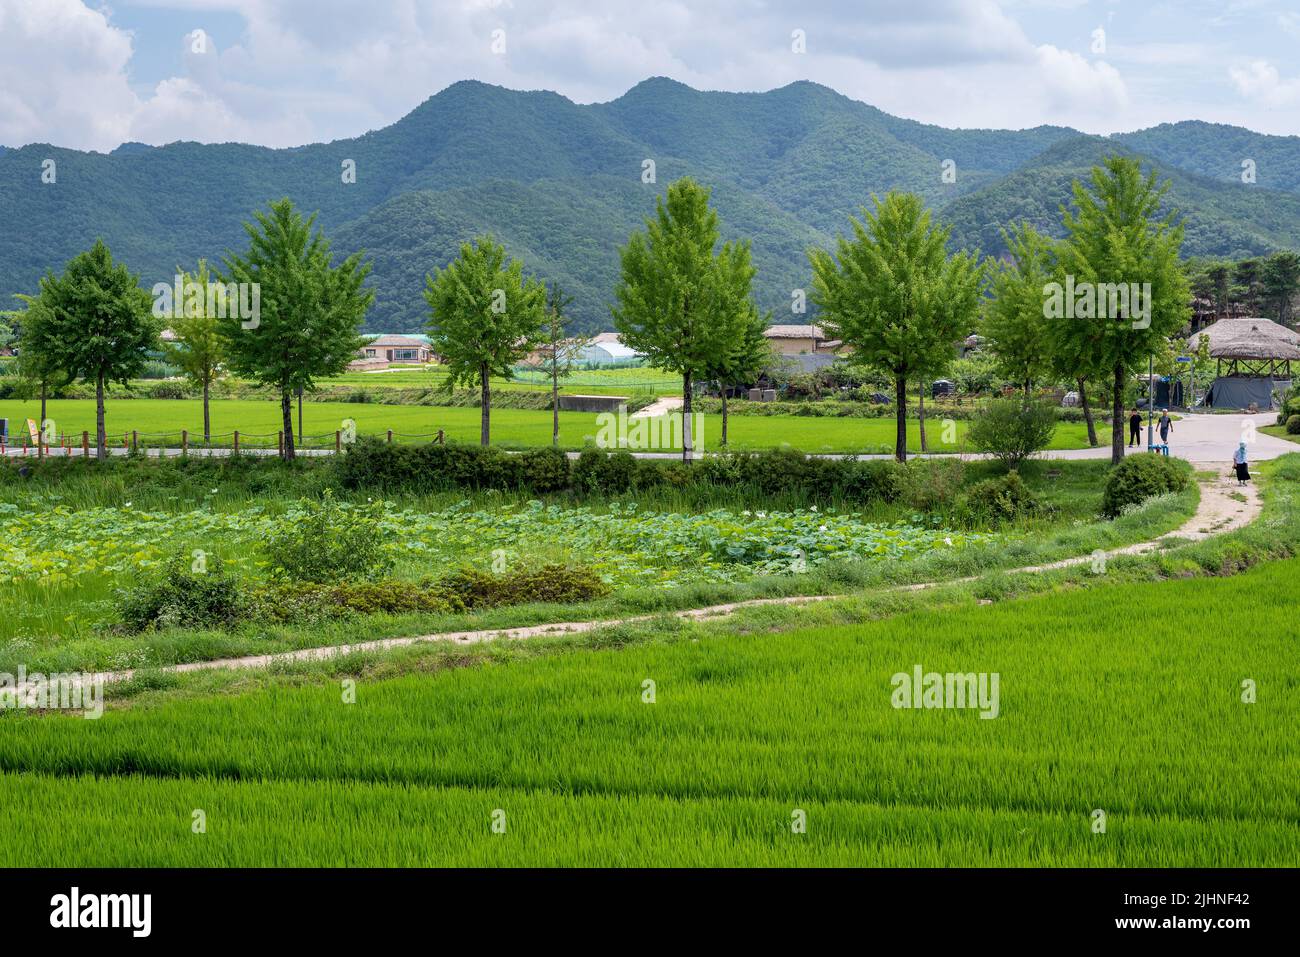 Hahoe traditional Folk Village in Andong South Korea, UNESCO site, on 17 July 2022 Stock Photo